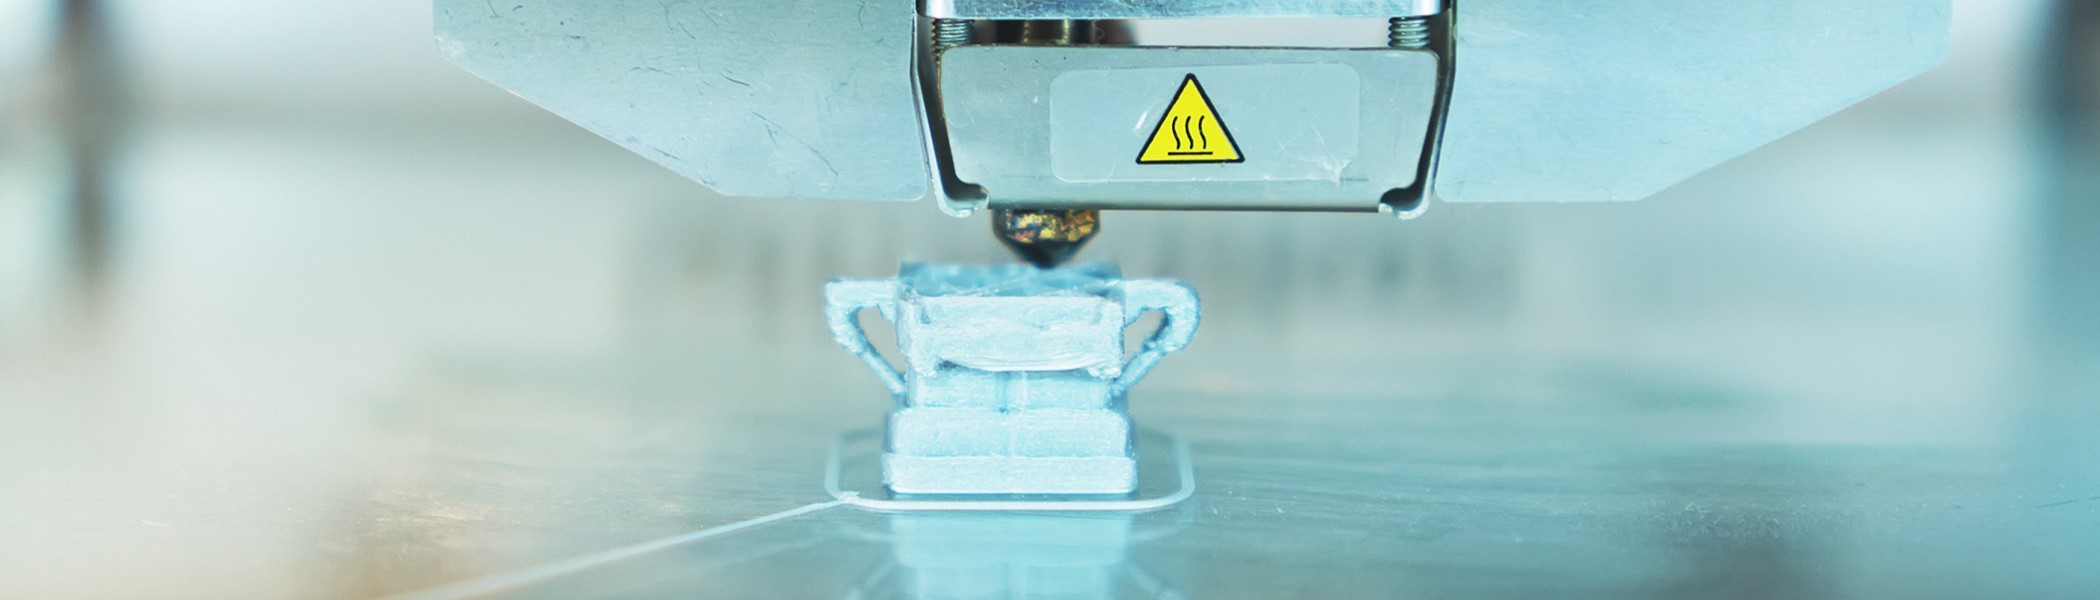 3D PRINTERS COULD PRESENT A RISK TO HUMAN HEALTH.